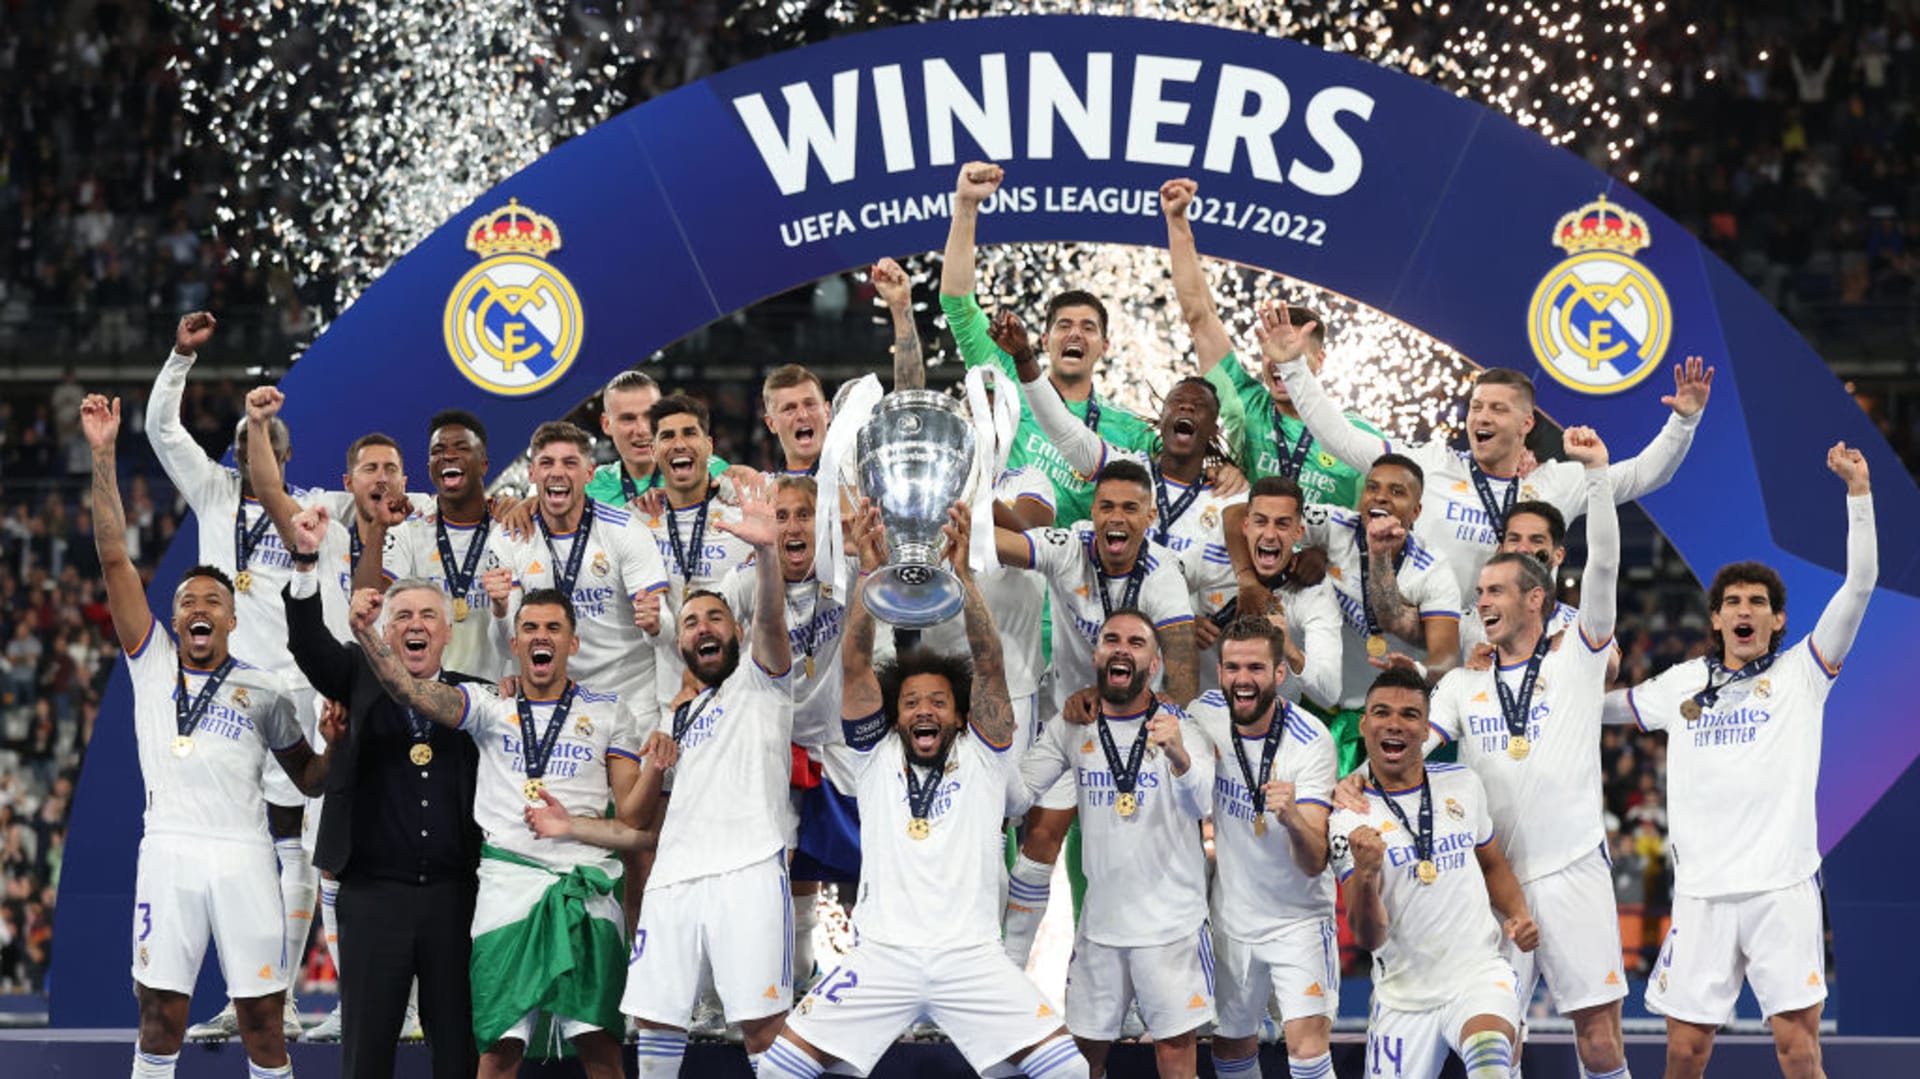 Champions League to resume on 7 August, UEFA Champions League